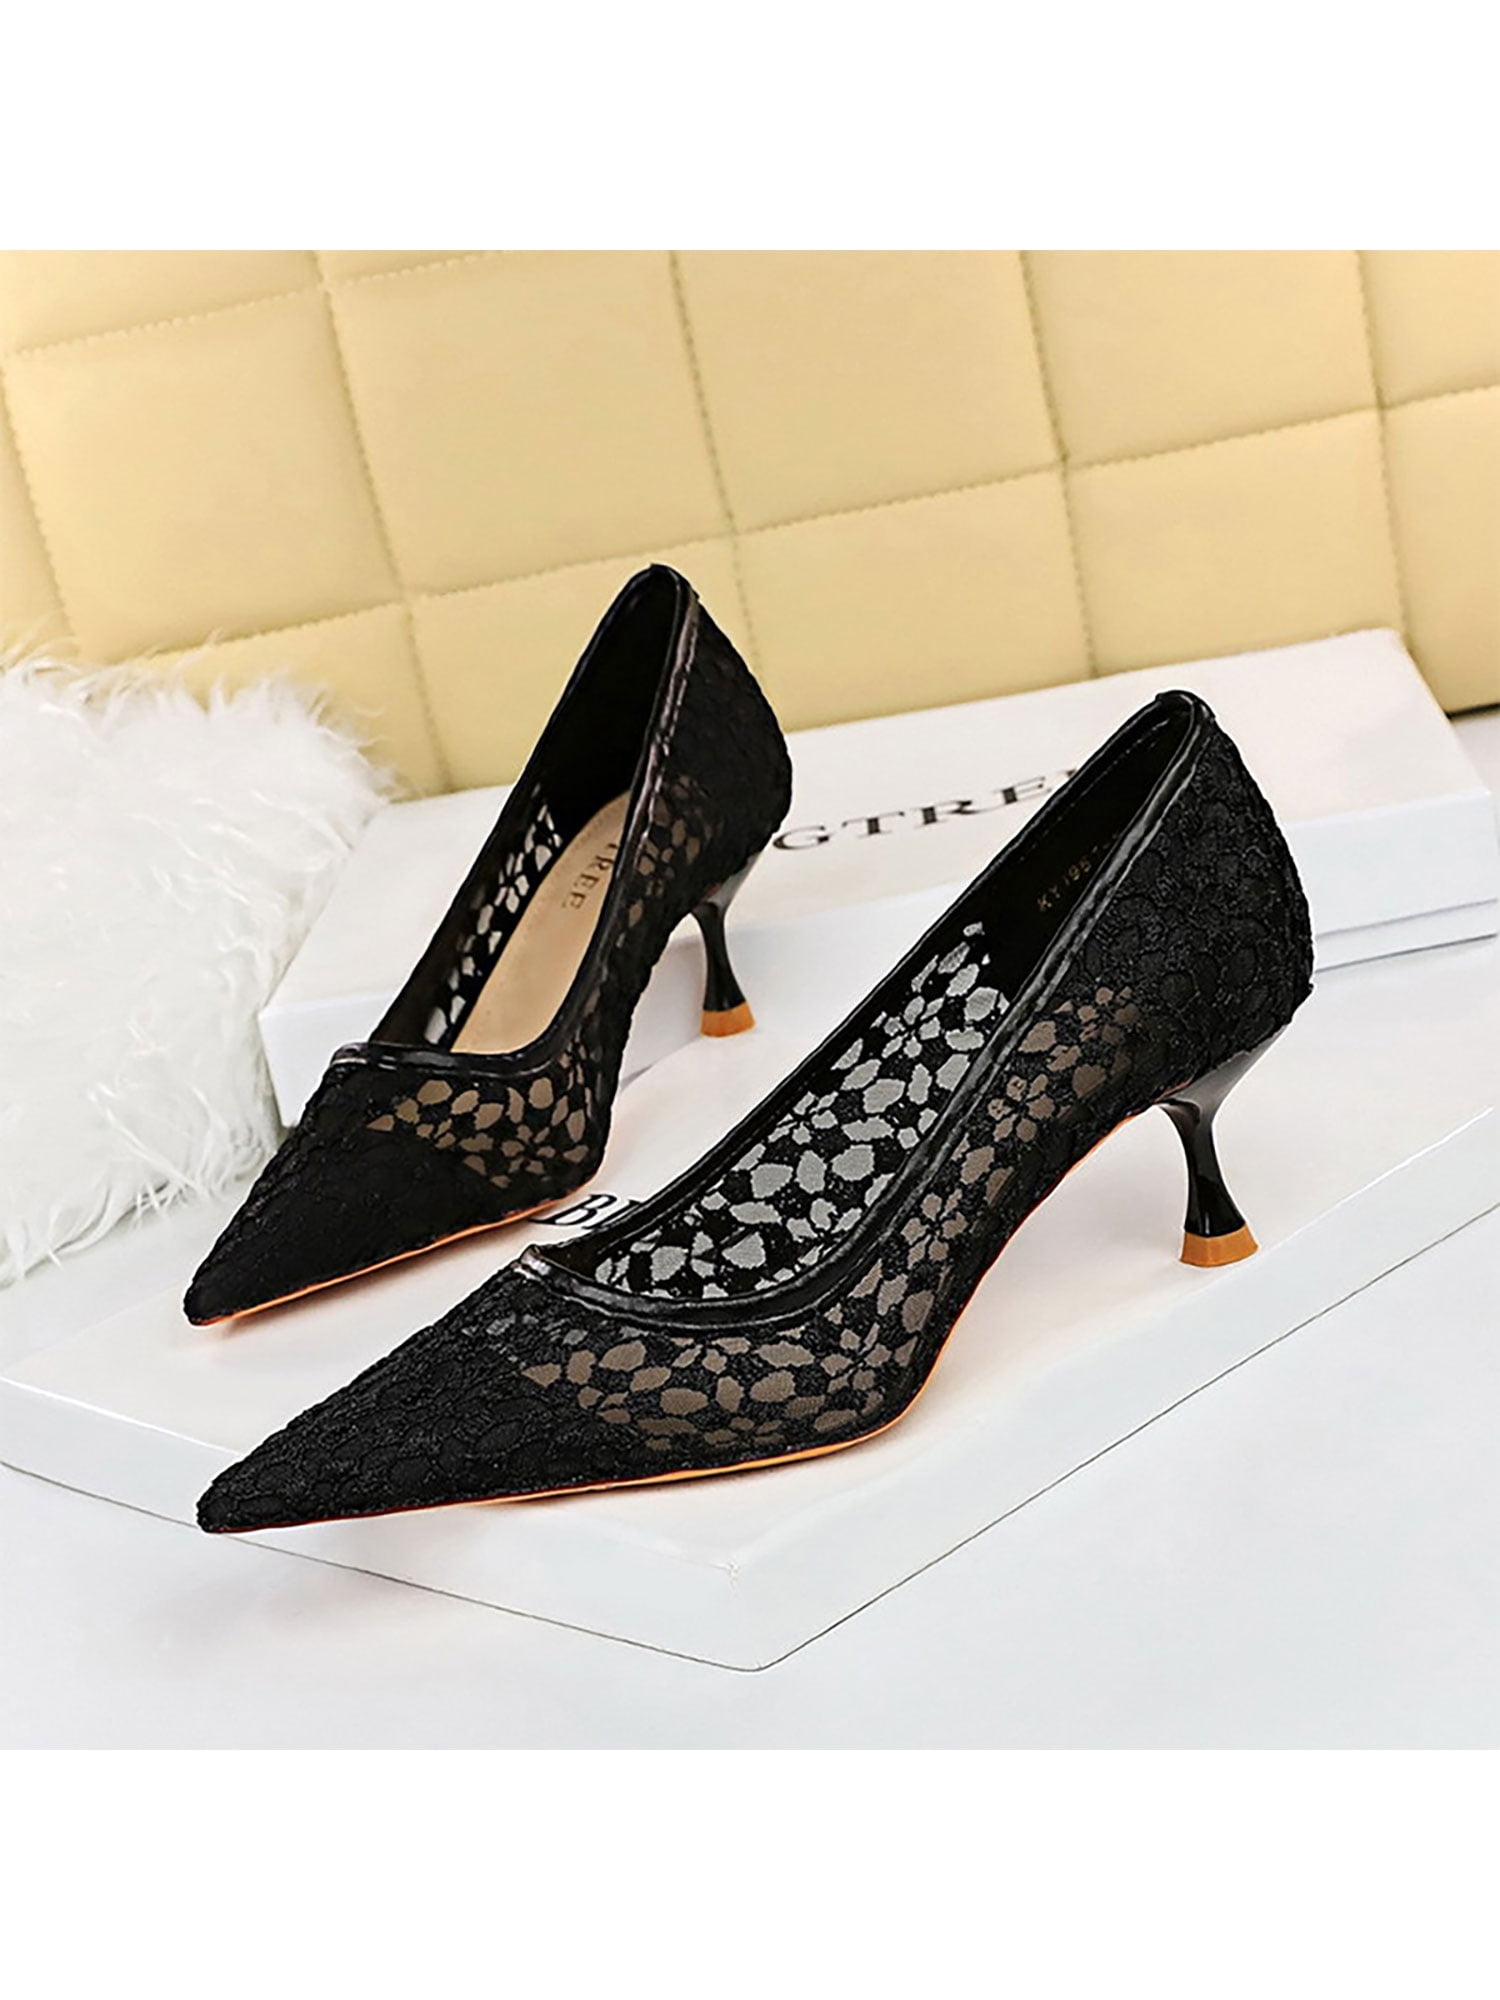 Brand New Sexy Black Naked Red High Heels Women Nude Glossy Pumps Ladies  Formal Work Shoes EA3 Plus Big Size 43 12 30 47 - AliExpress